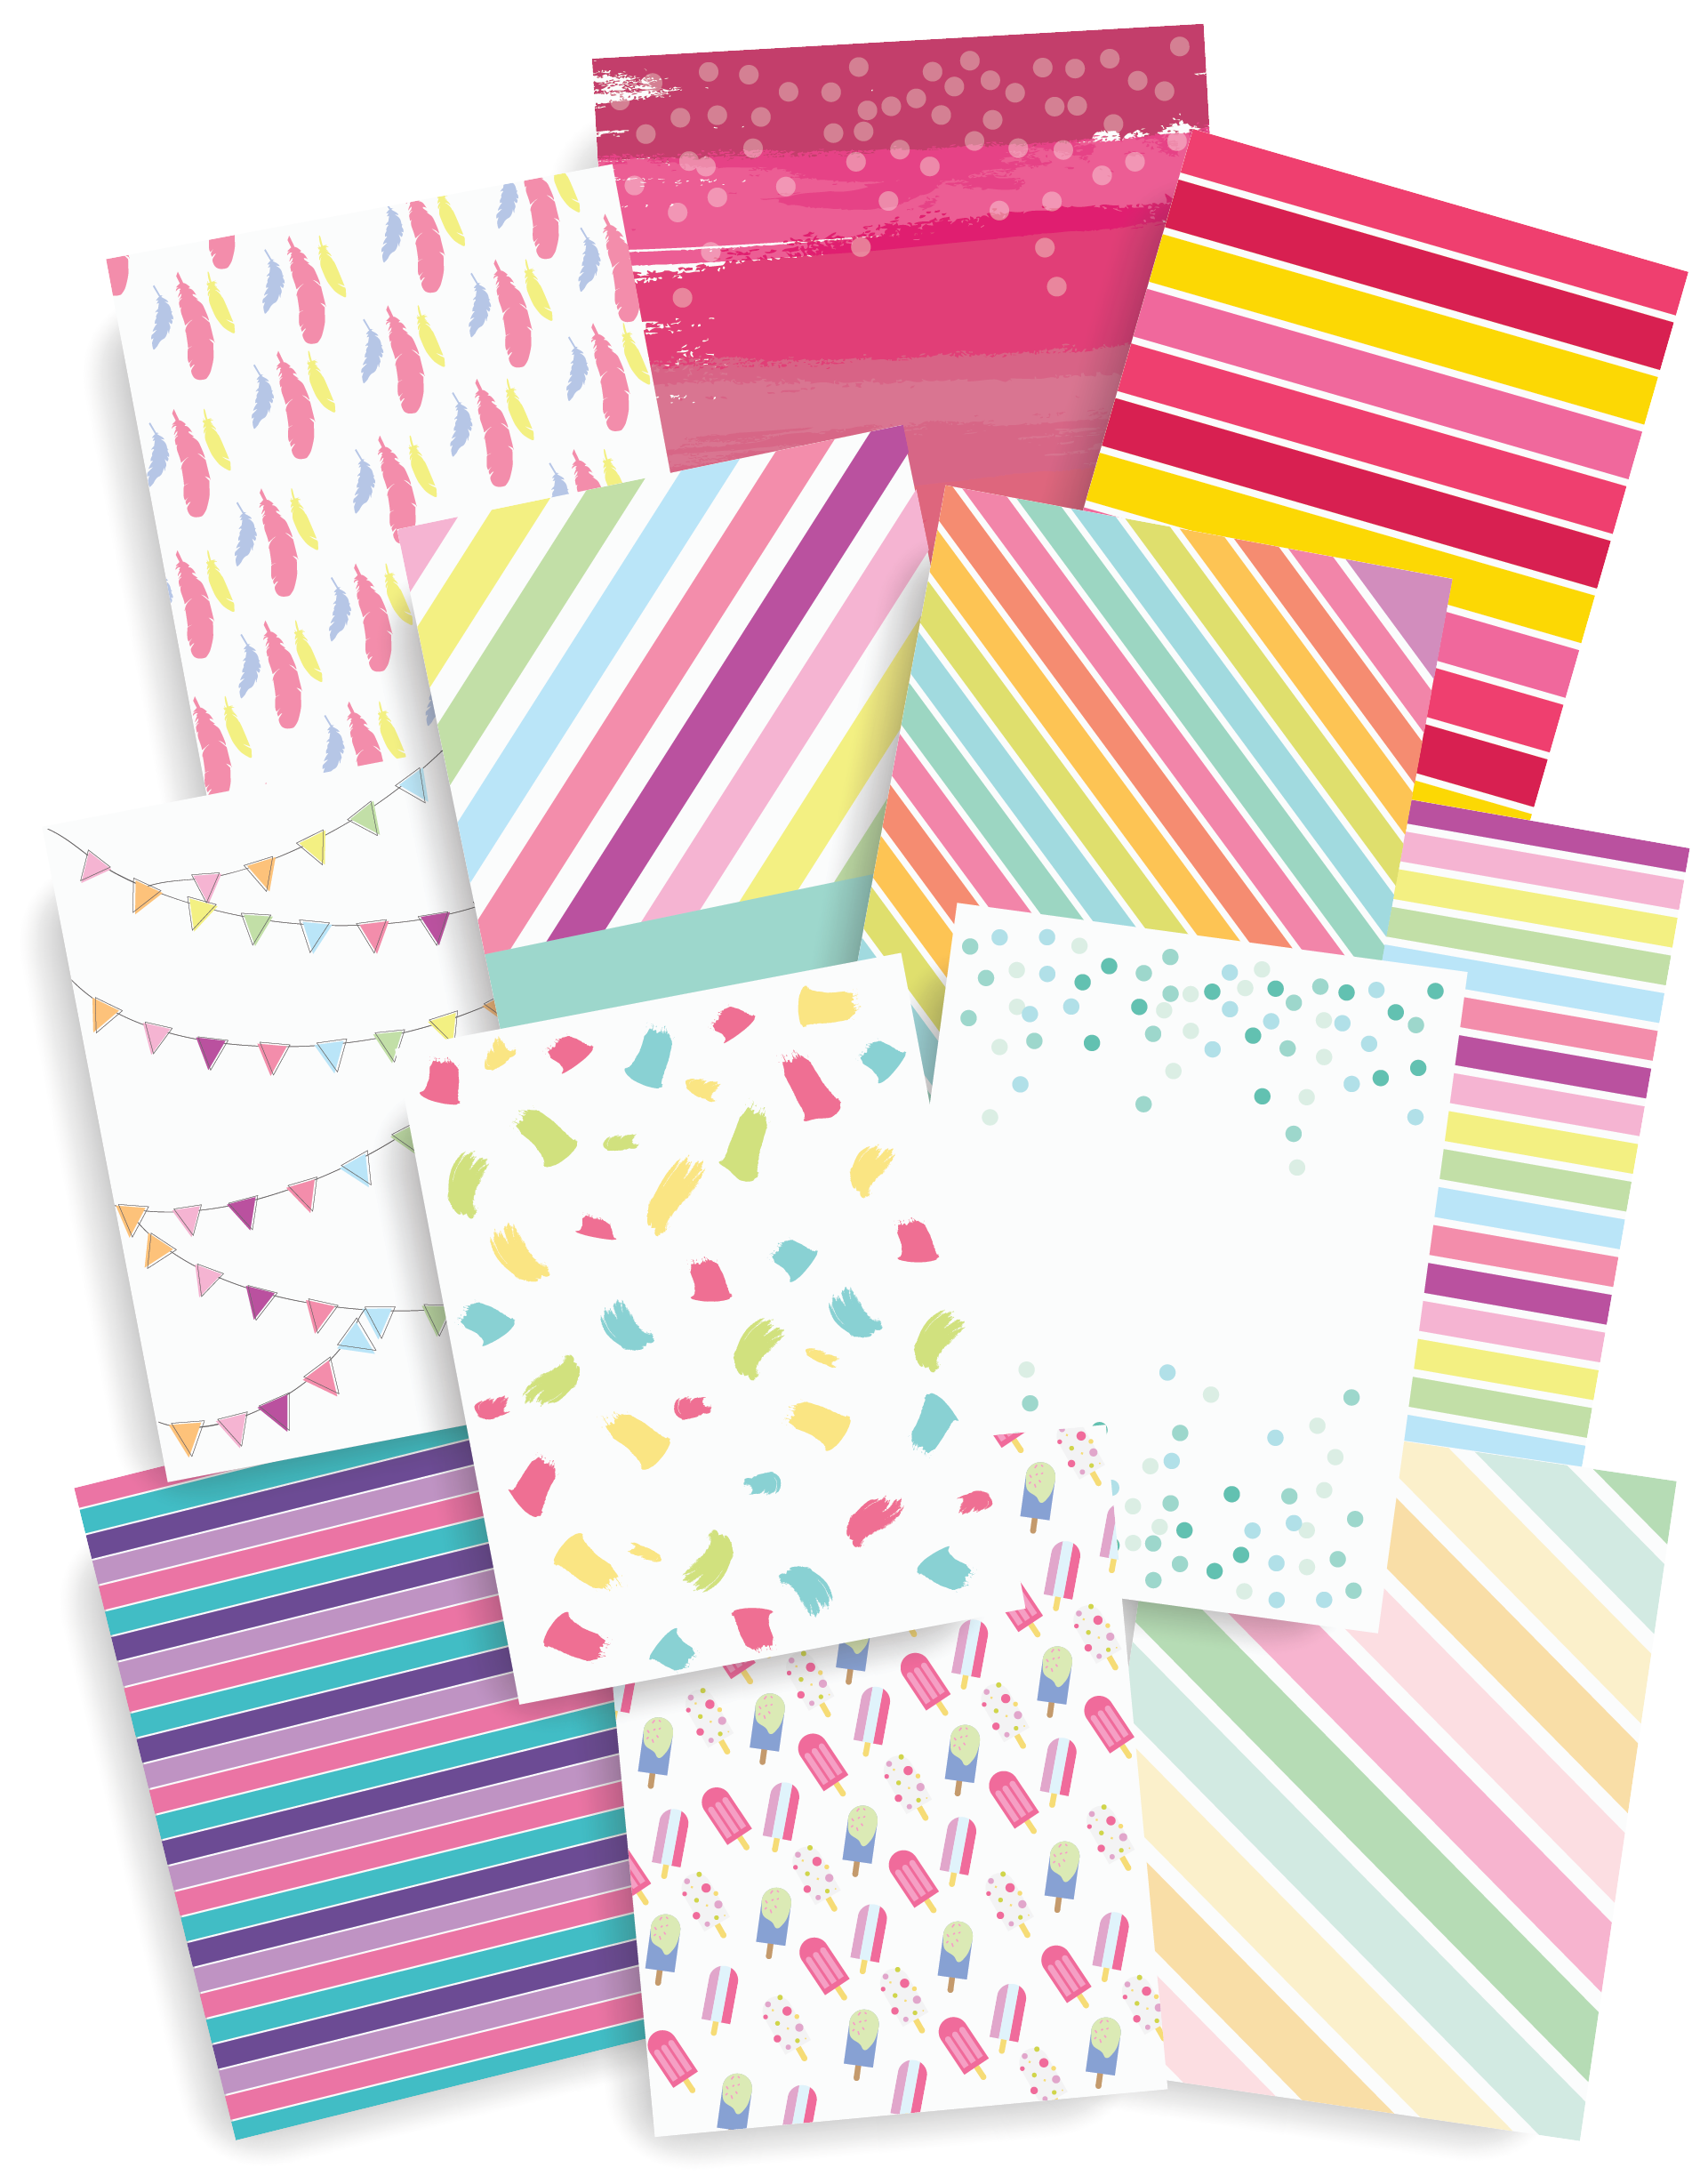 12 Page Planner Covers | Patterned Dividers